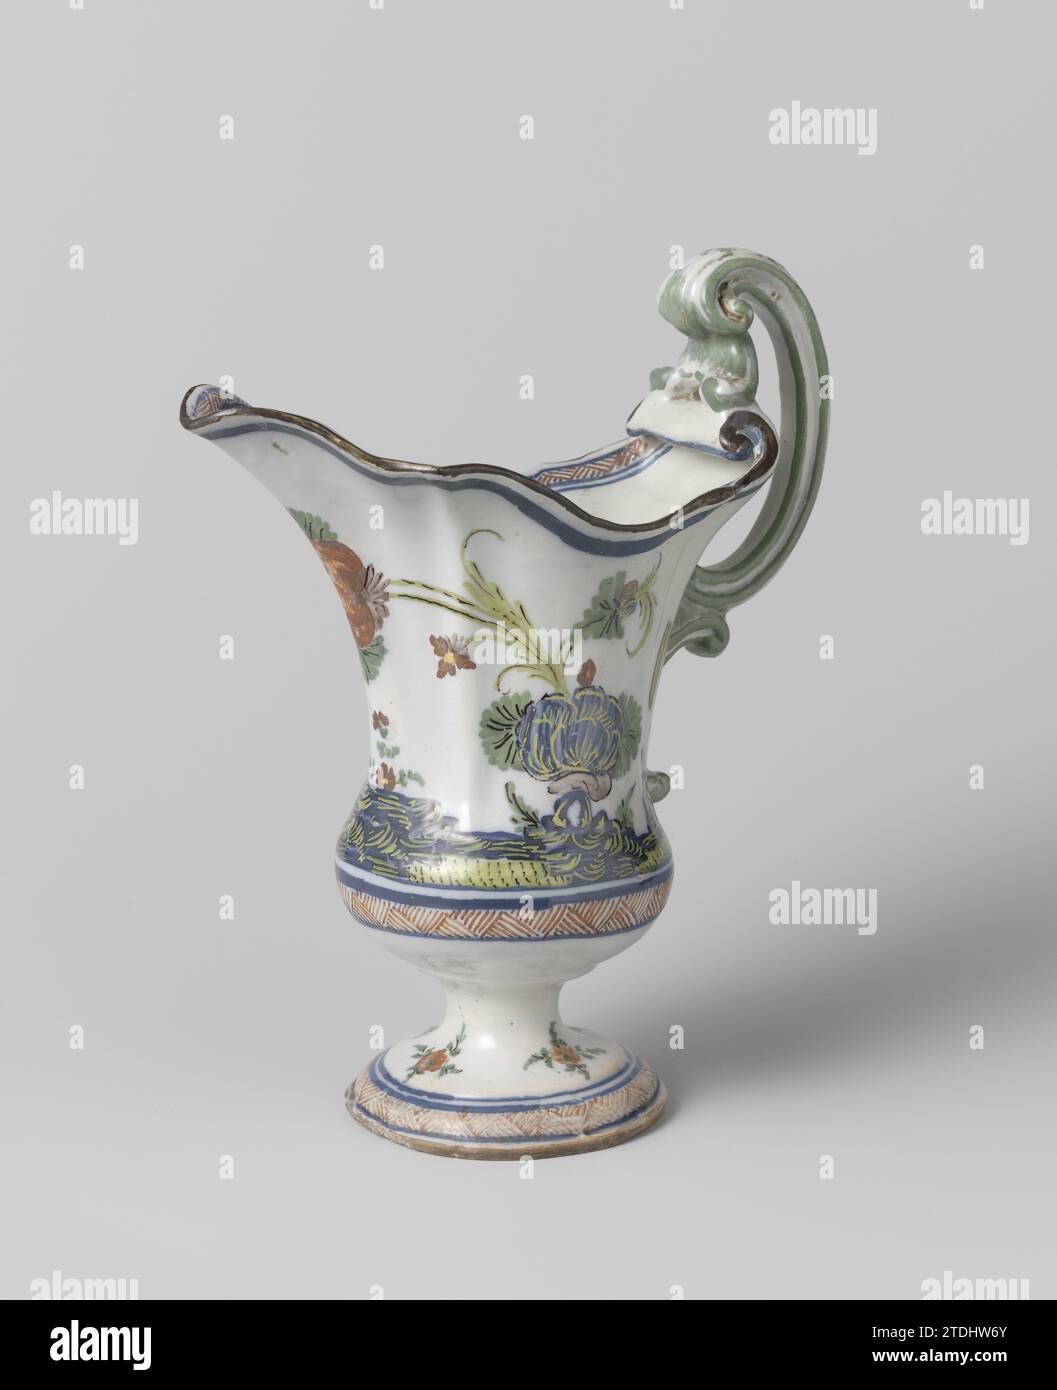 Can, on the abdomen painted with a soil with fence and flower branches, anonymous, c. 1740 - c. 1770 Can of multi -colored flowing. The jug has a corrugated mouth opening with a wide spout and stands on a foot. The belly is half spherical at the bottom and painted with horizontal tires on which a soil with a fence and flower branches. The ear is double C-shaped. Four flower branches were painted on the foot. Italy earthenware. tin glaze. Can of multi -colored flowing. The jug has a corrugated mouth opening with a wide spout and stands on a foot. The belly is half spherical at the bottom and pa Stock Photo